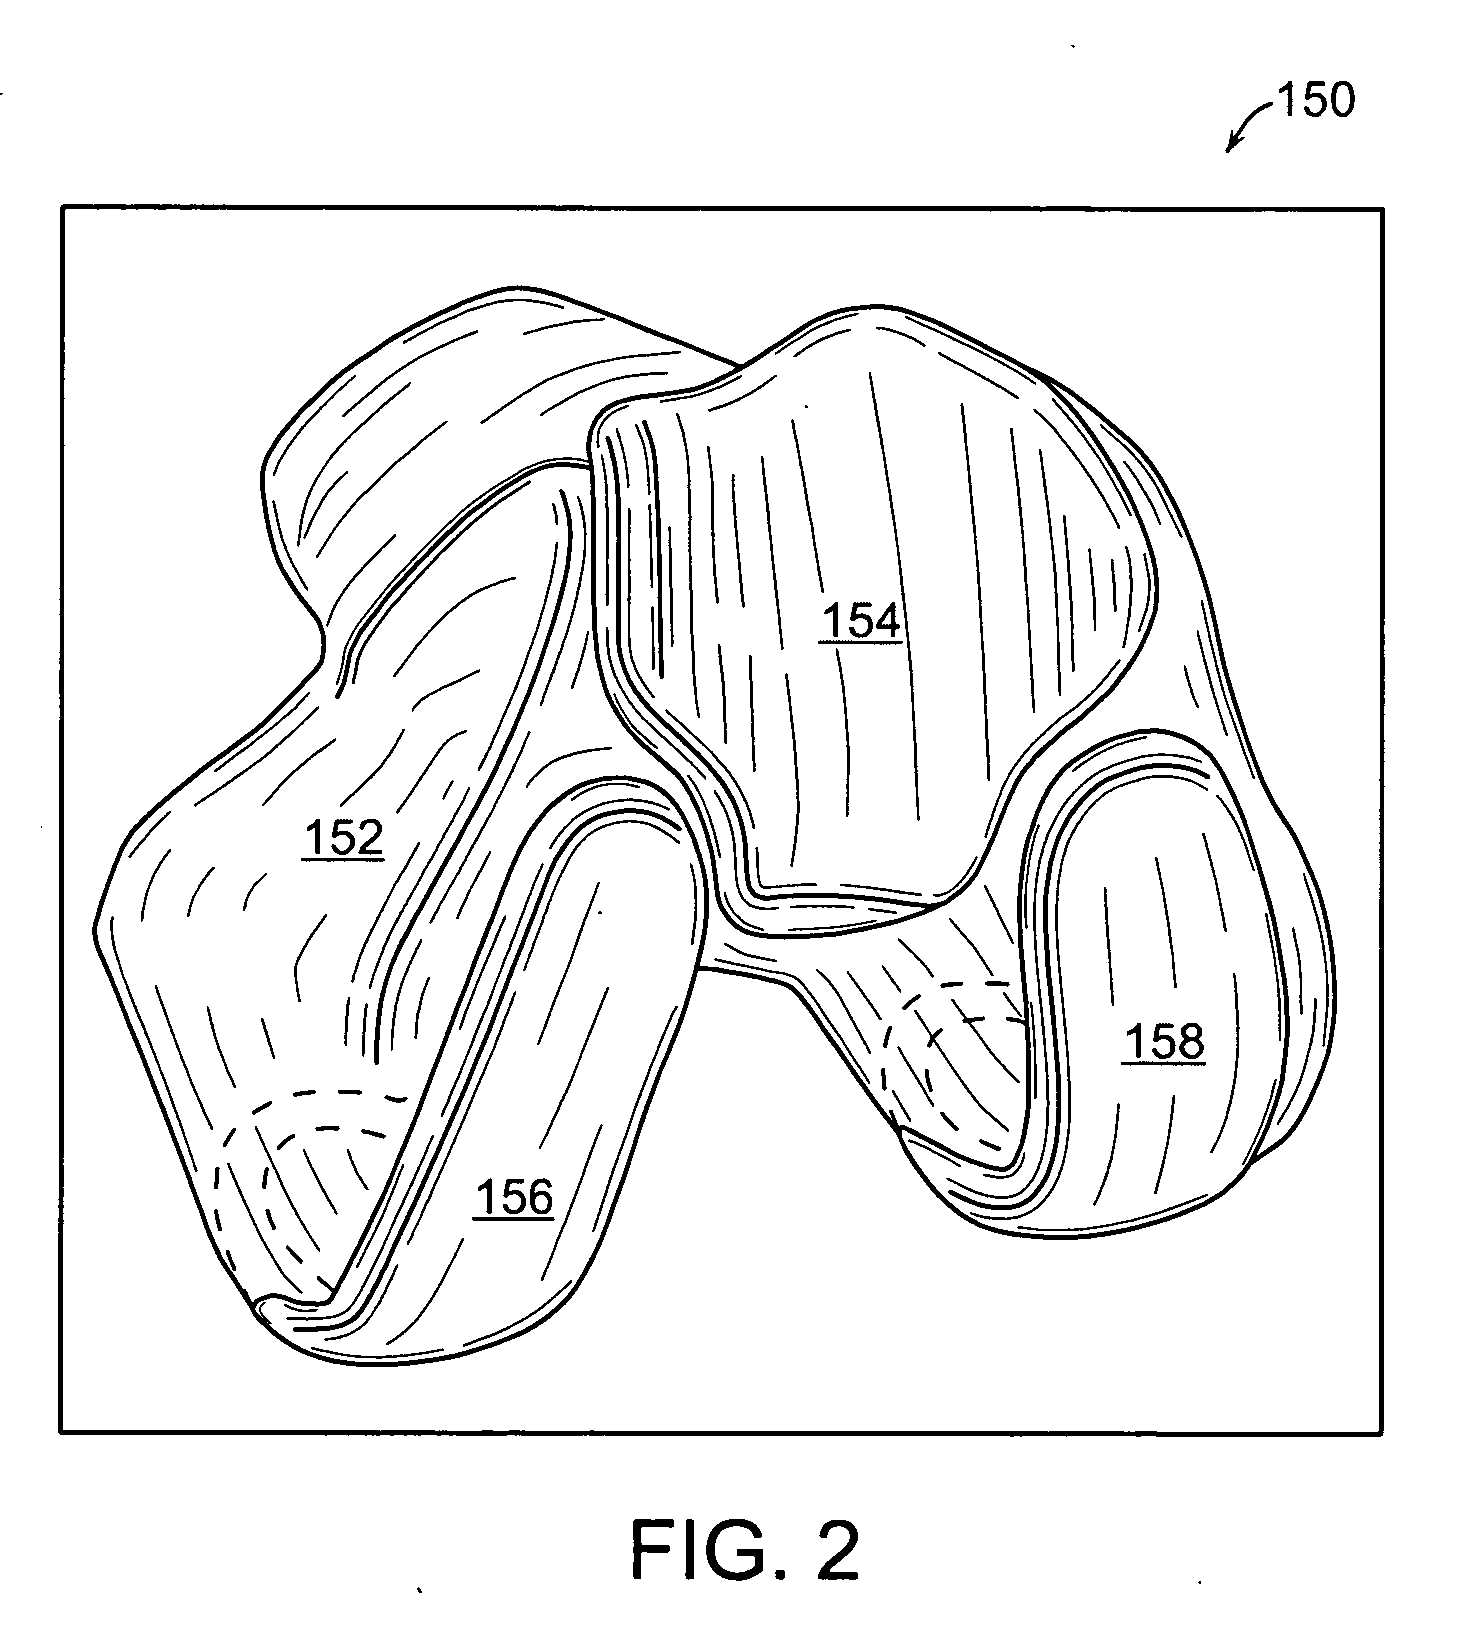 Implant planning using areas representing cartilage